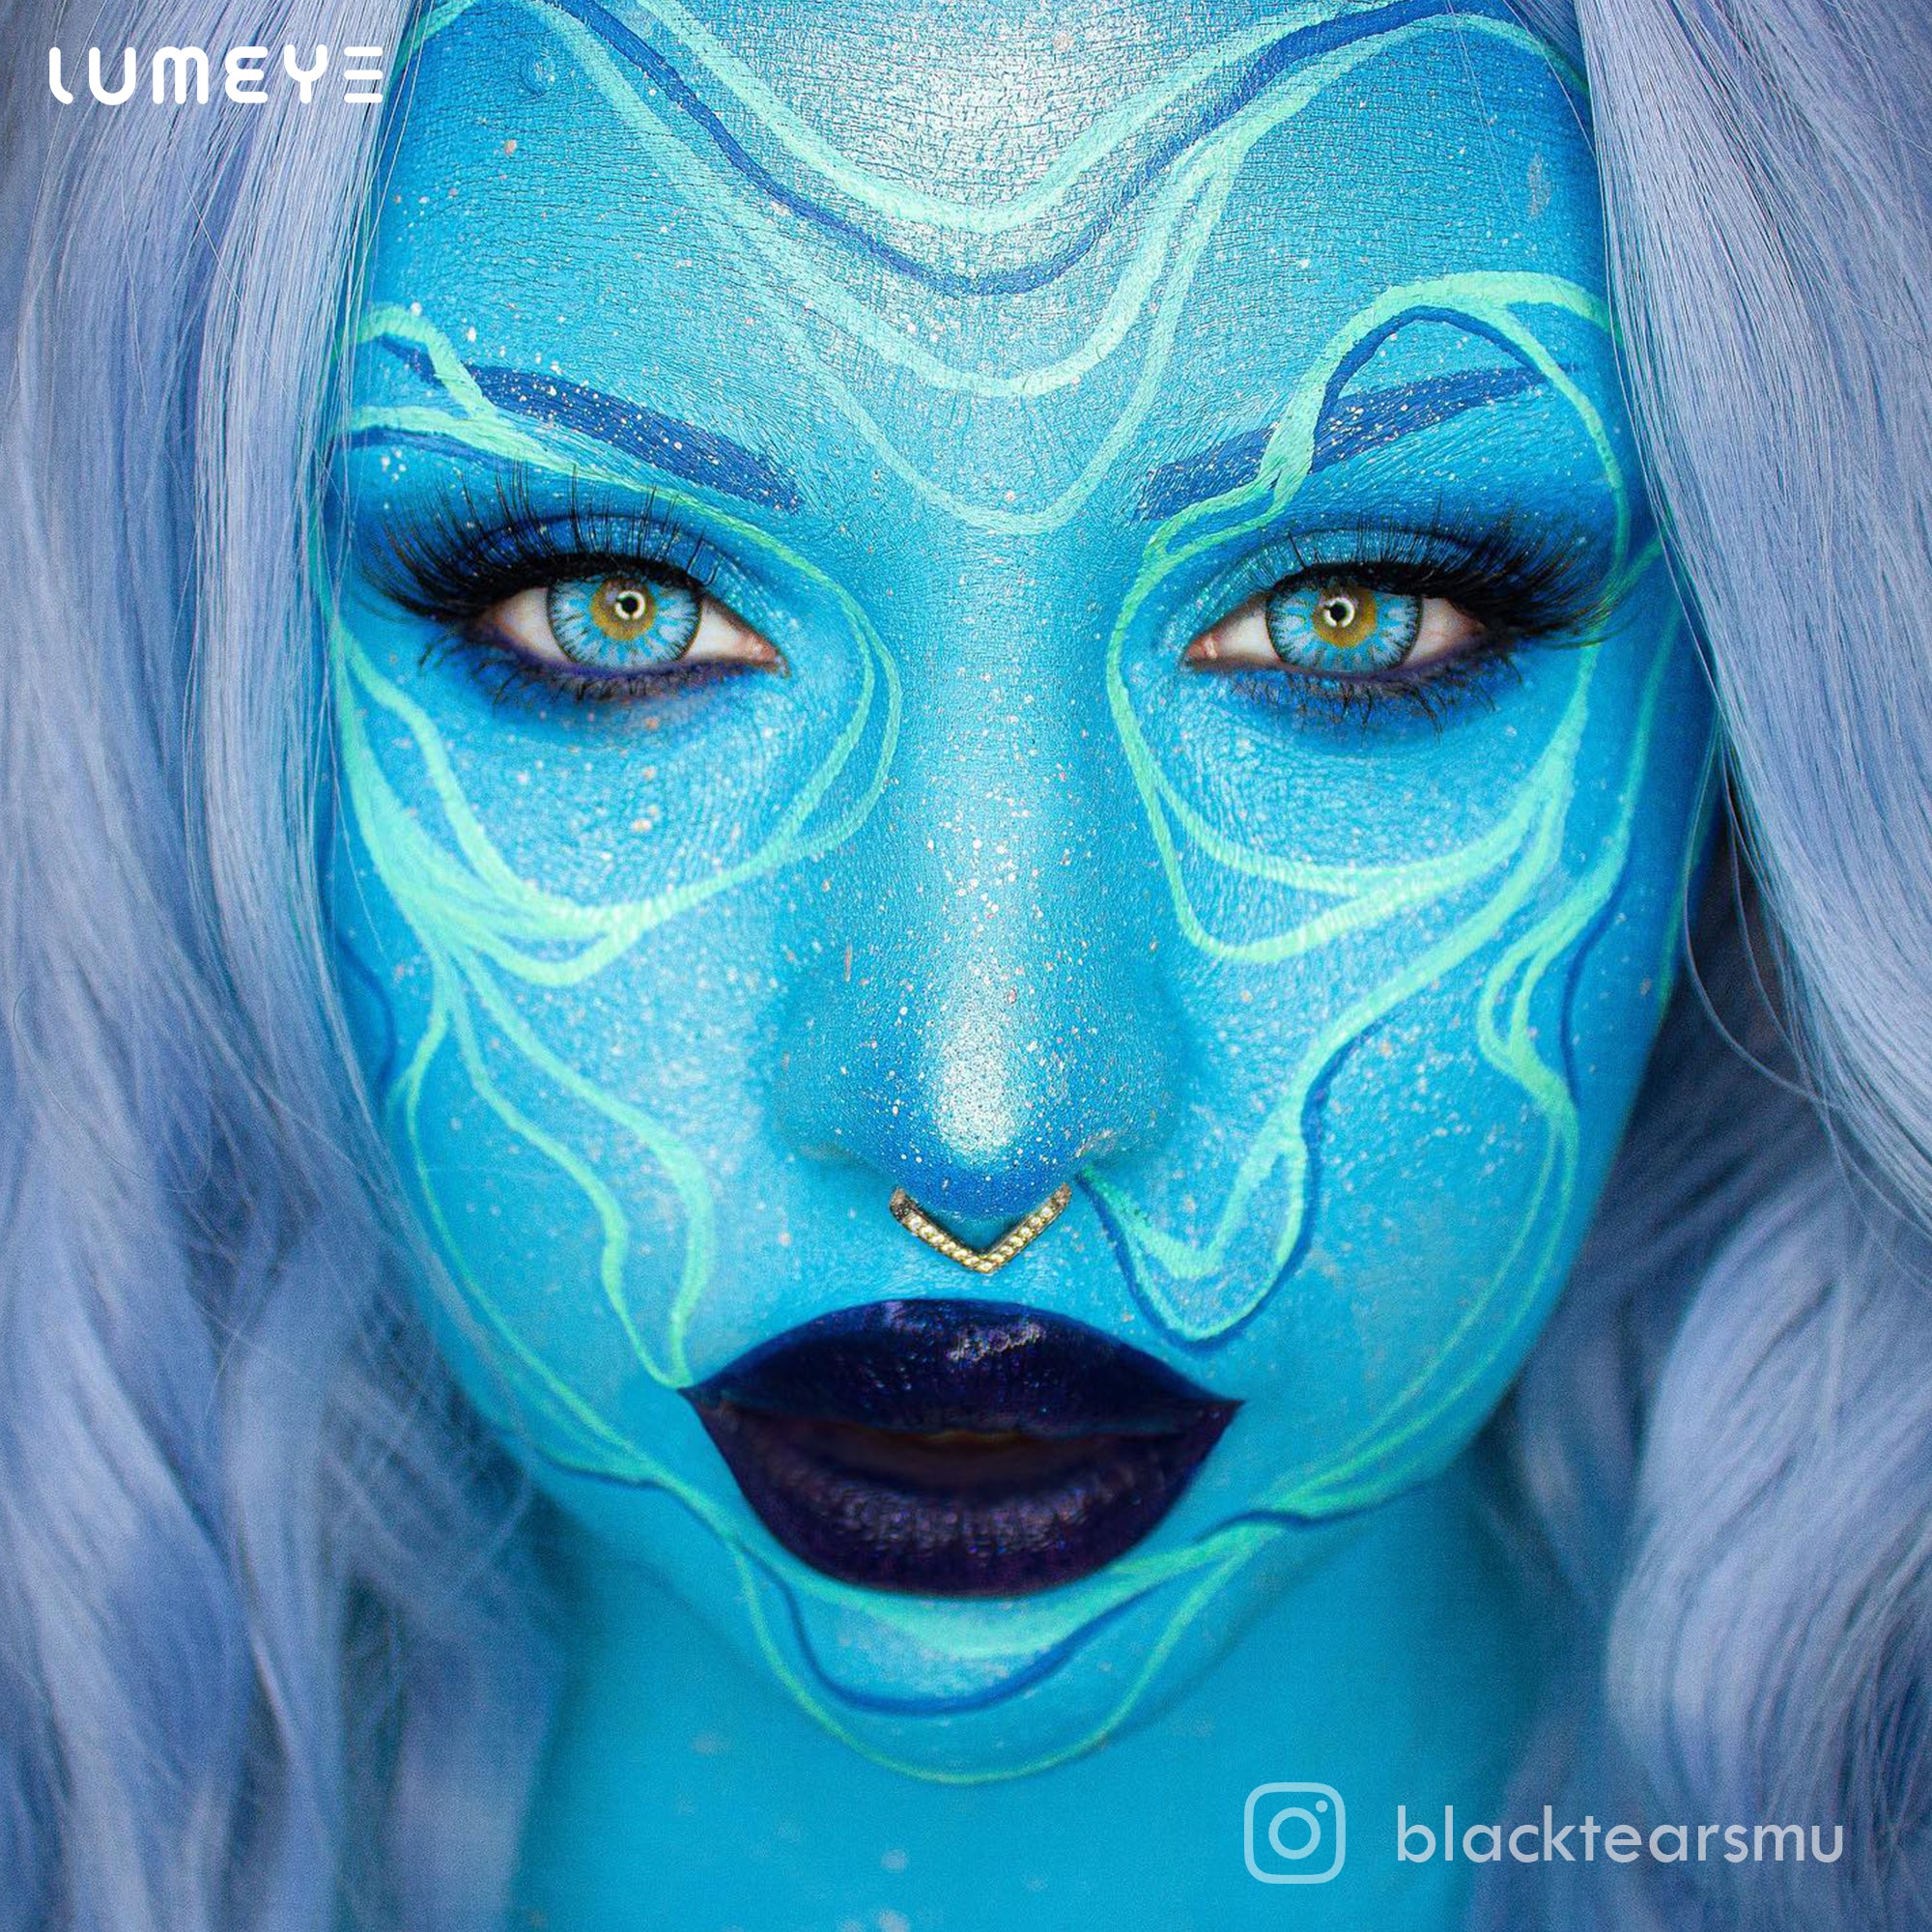 Best COLORED CONTACTS - LUMEYE Mystery Blue Colored Contact Lenses - LUMEYE